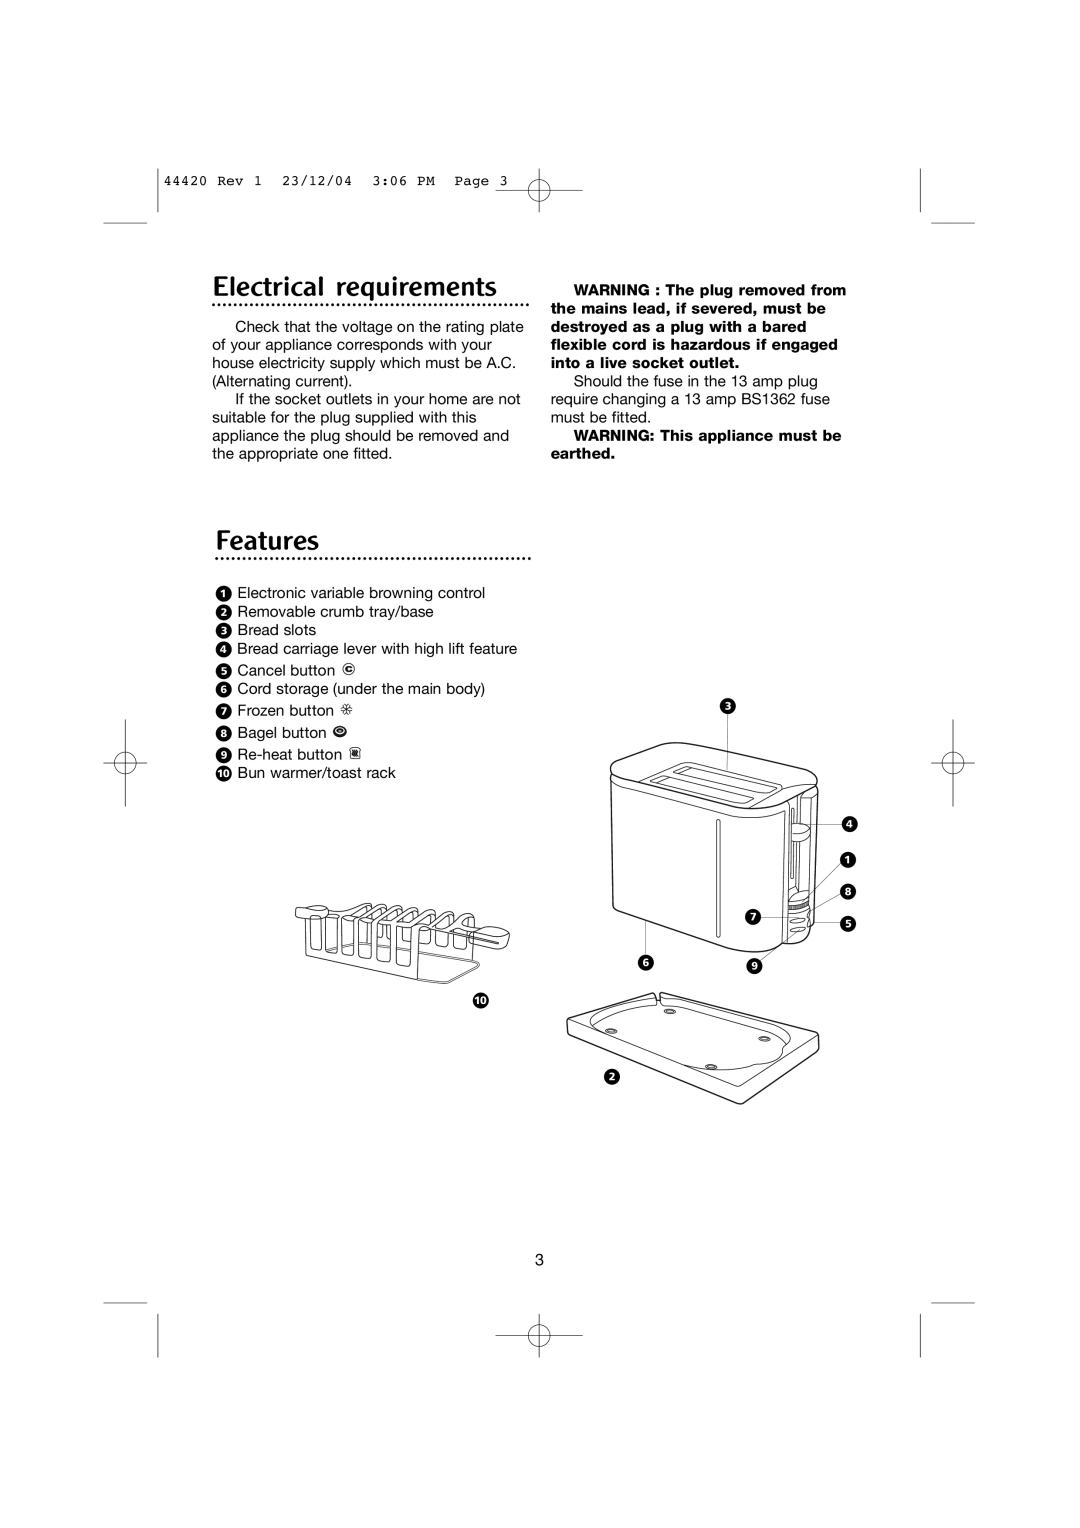 Morphy Richards 2 slice manhattan toaster manual Electrical requirements, Features, WARNING This appliance must be earthed 